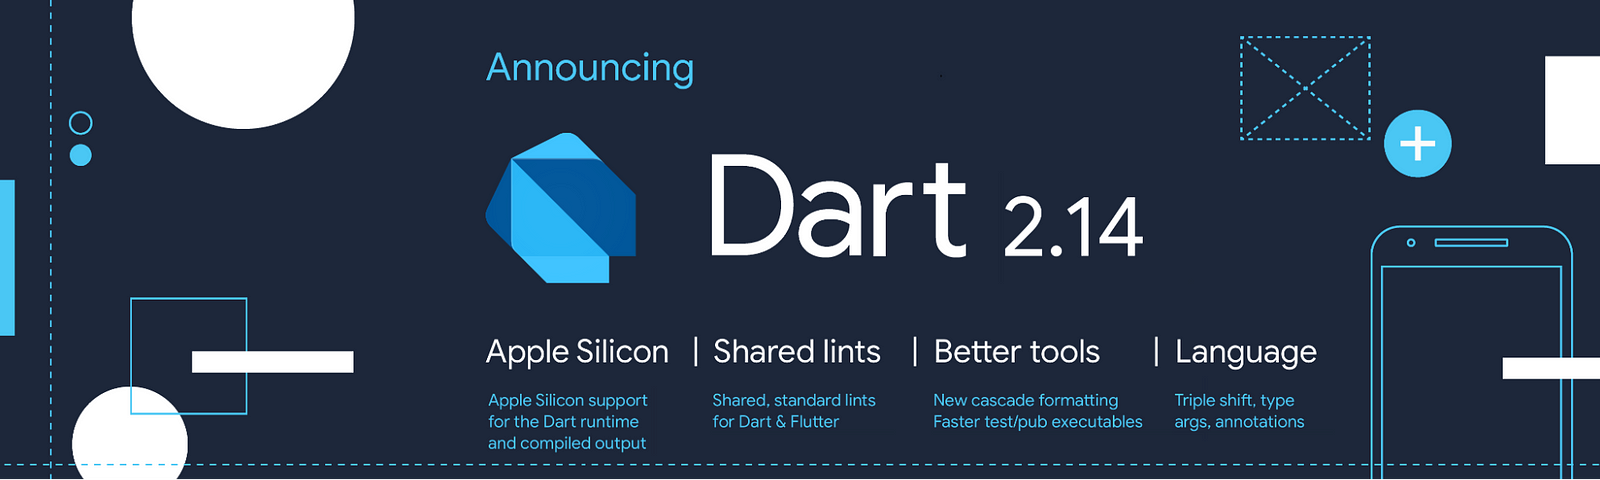 Announcing Dart 2.14. Apple Silicon and improved… | by Michael Thomsen | Dart | Medium